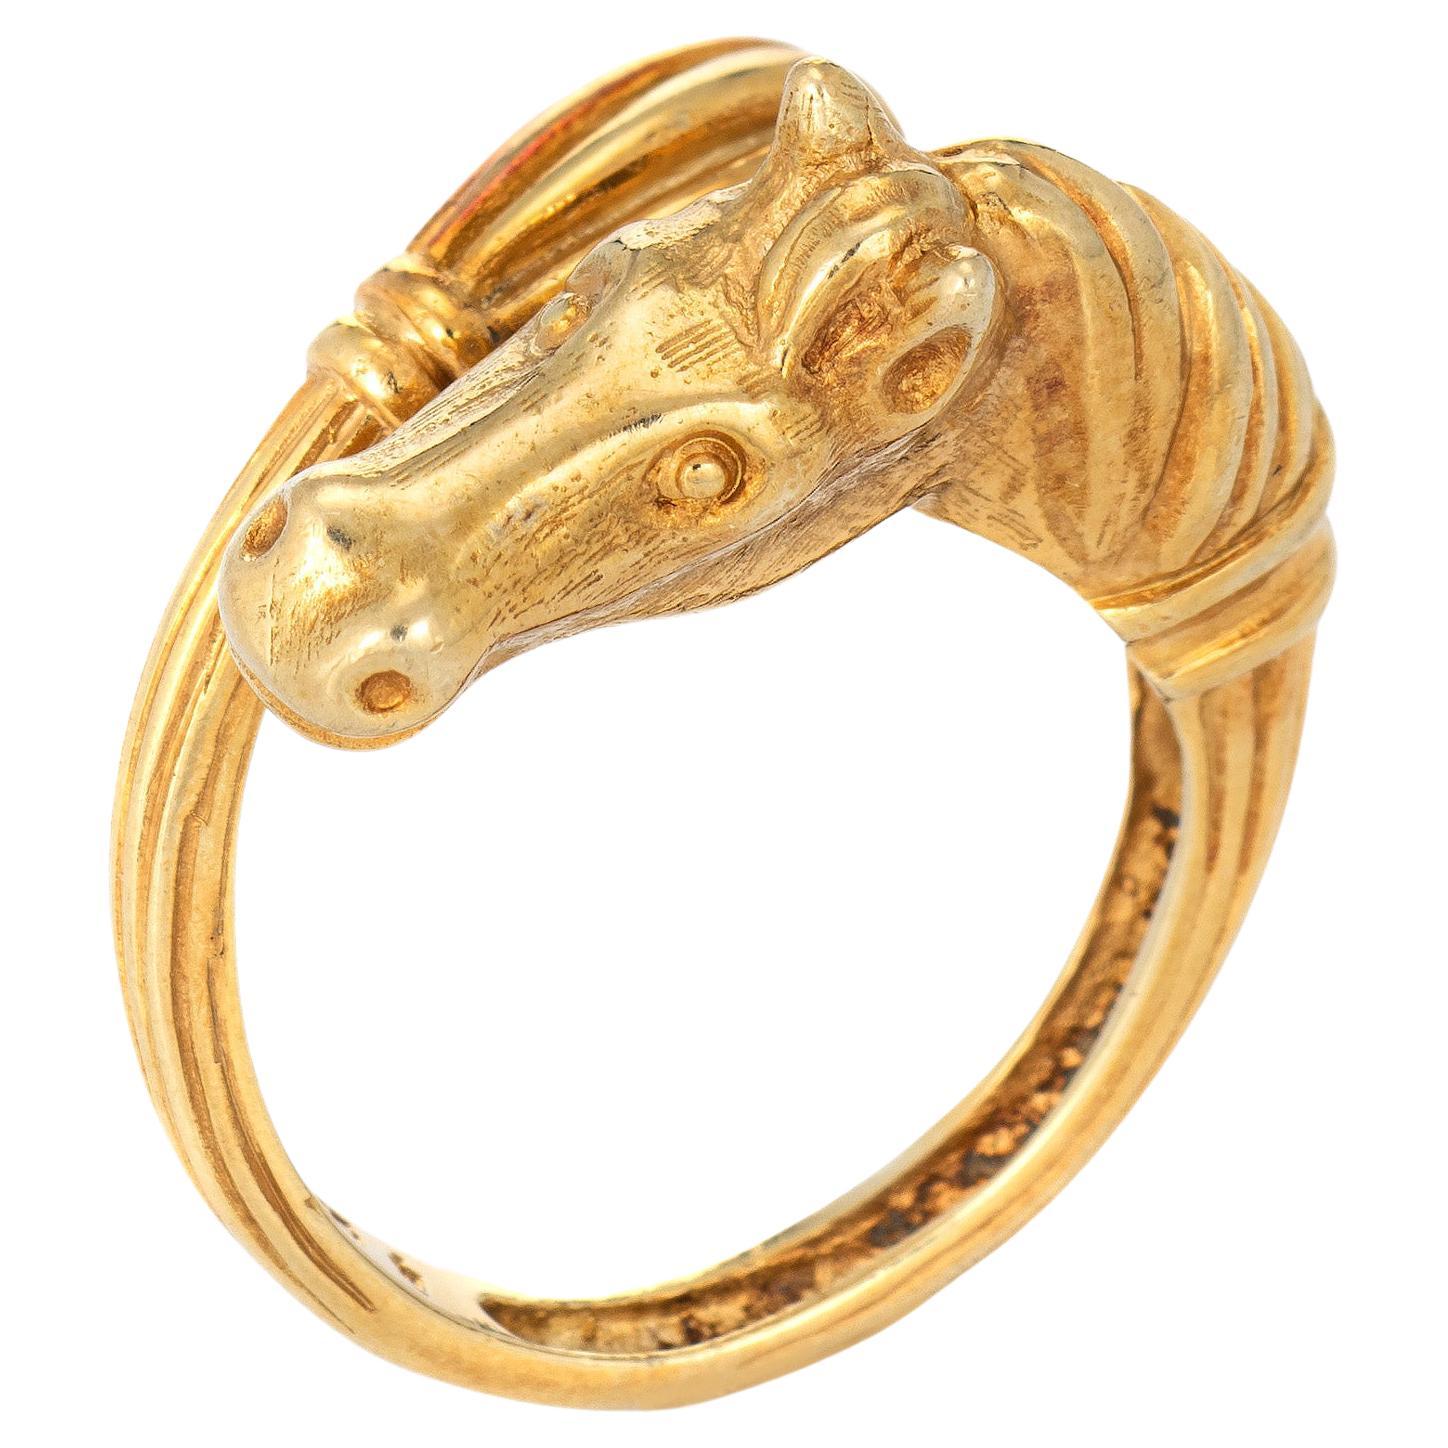 Vintage Horse Ring 14k Yellow Gold Estate Animal Tail Jewelry Equestrian